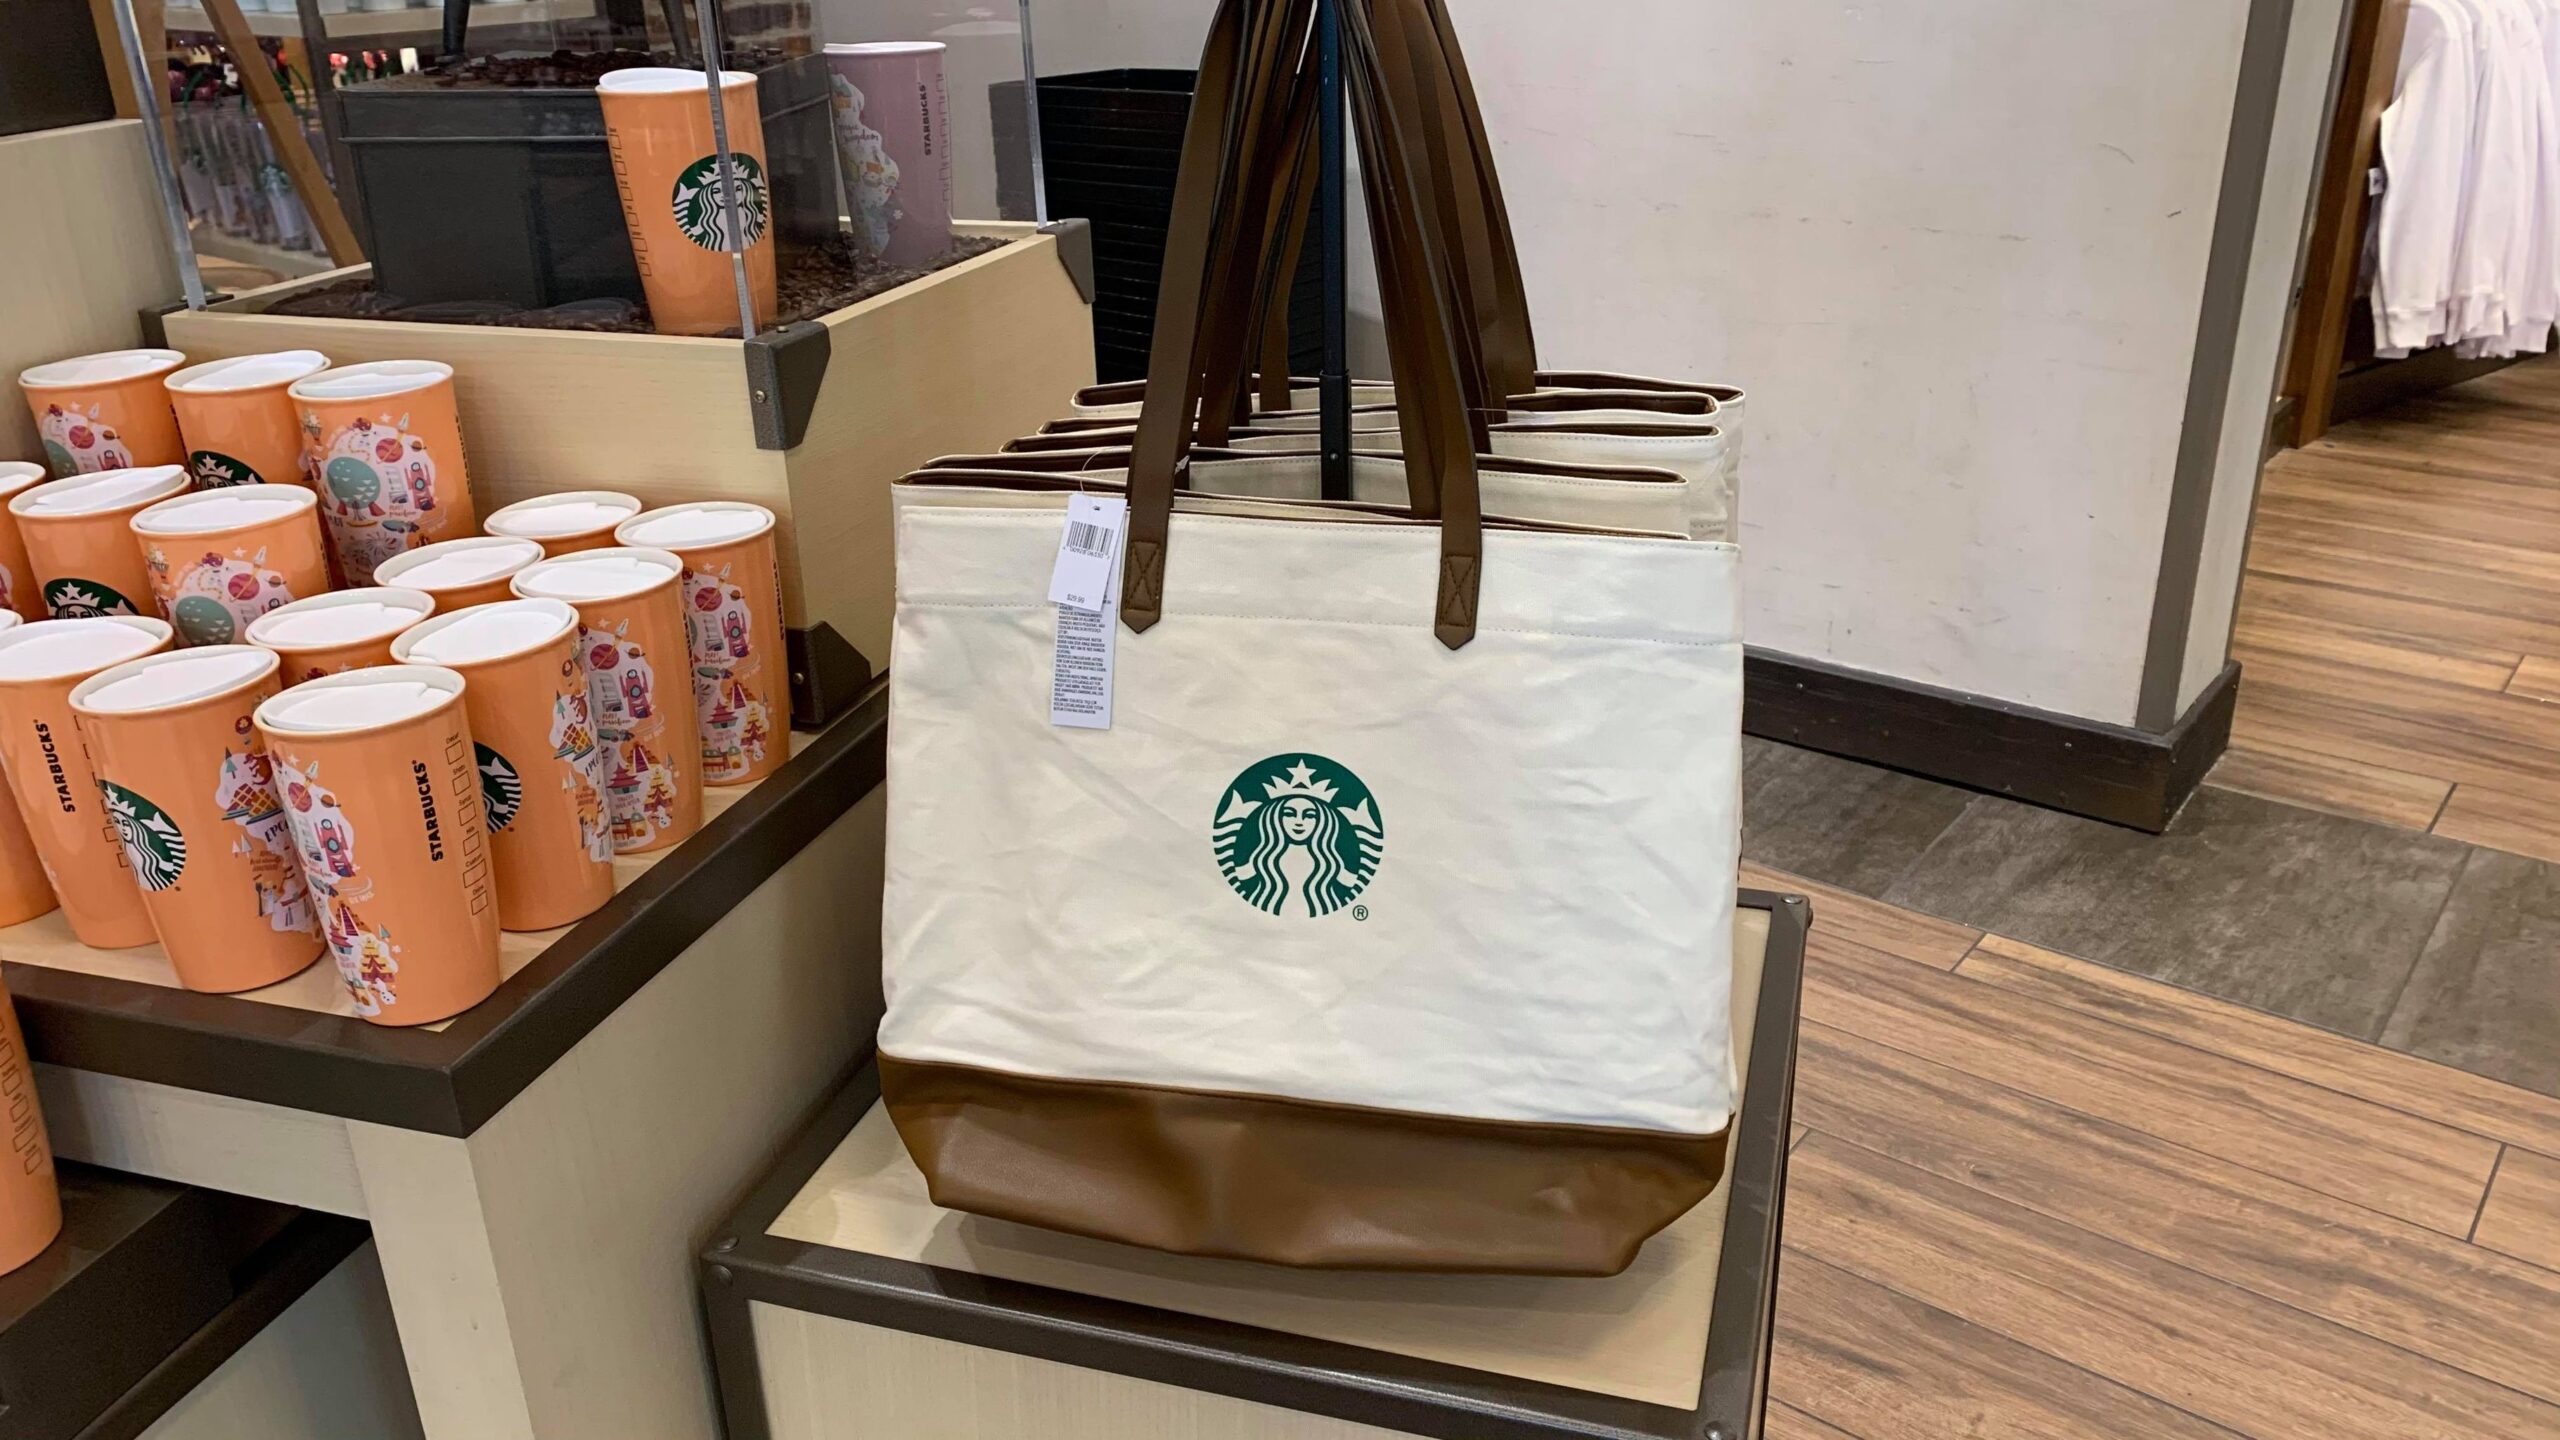 Disney World & Starbucks team up for this super cute tote bag